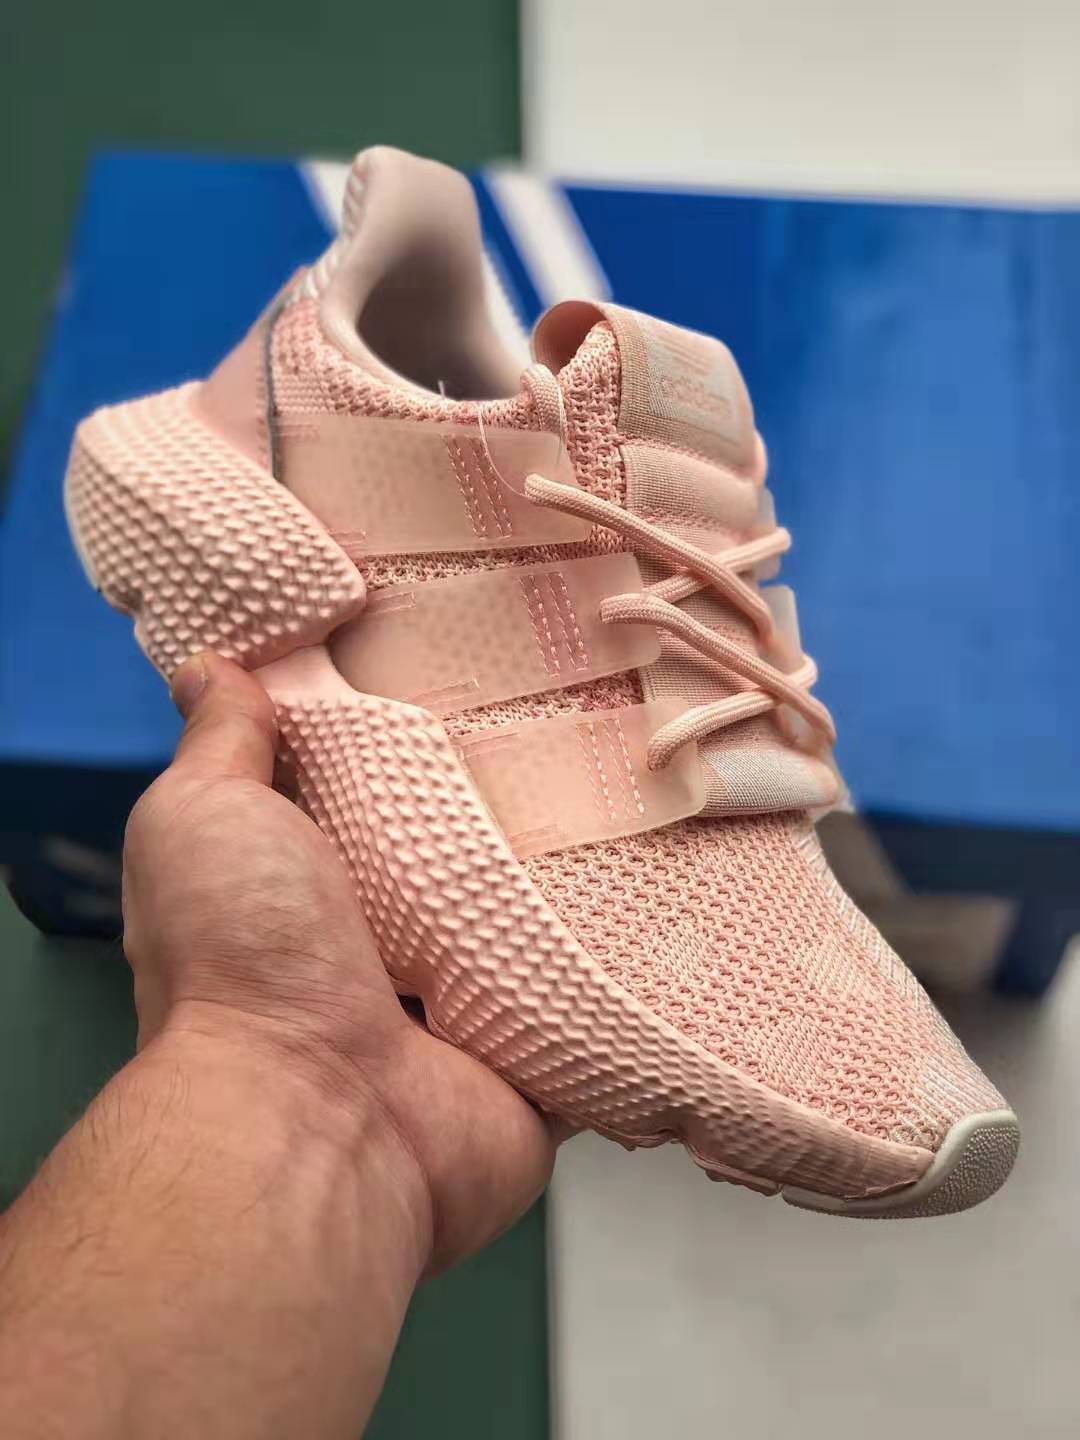 Adidas Prophere Climacool Pink EF2850 - Latest Originals Collection!